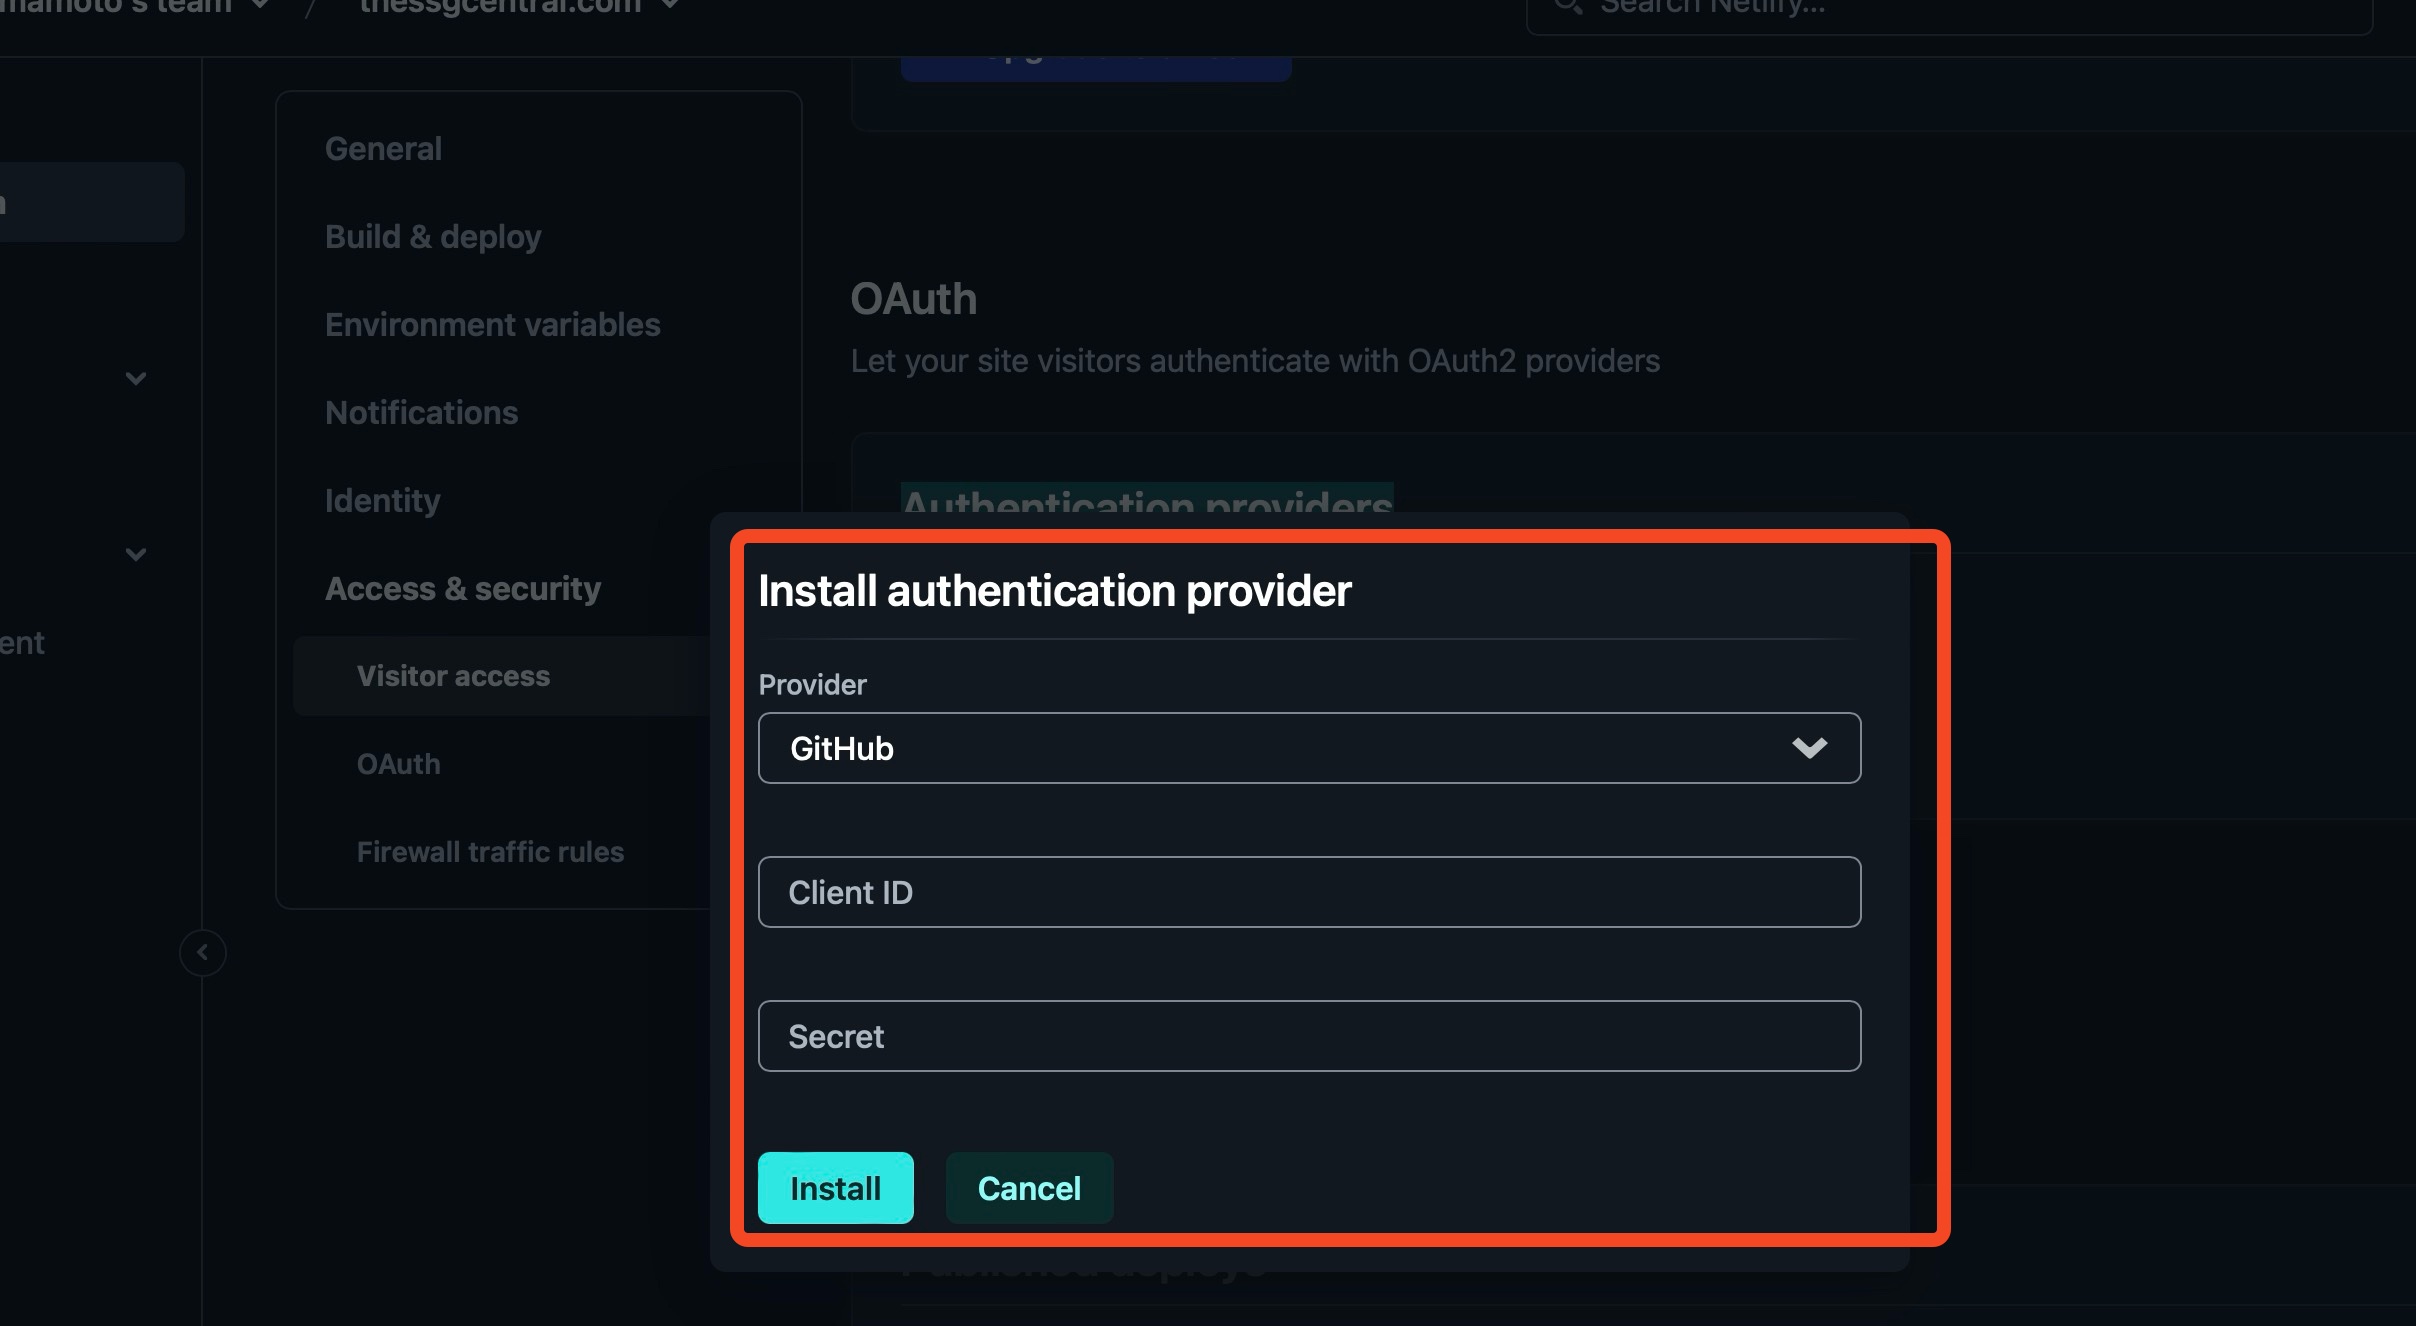 Authentication Provider fields that needs to be filled